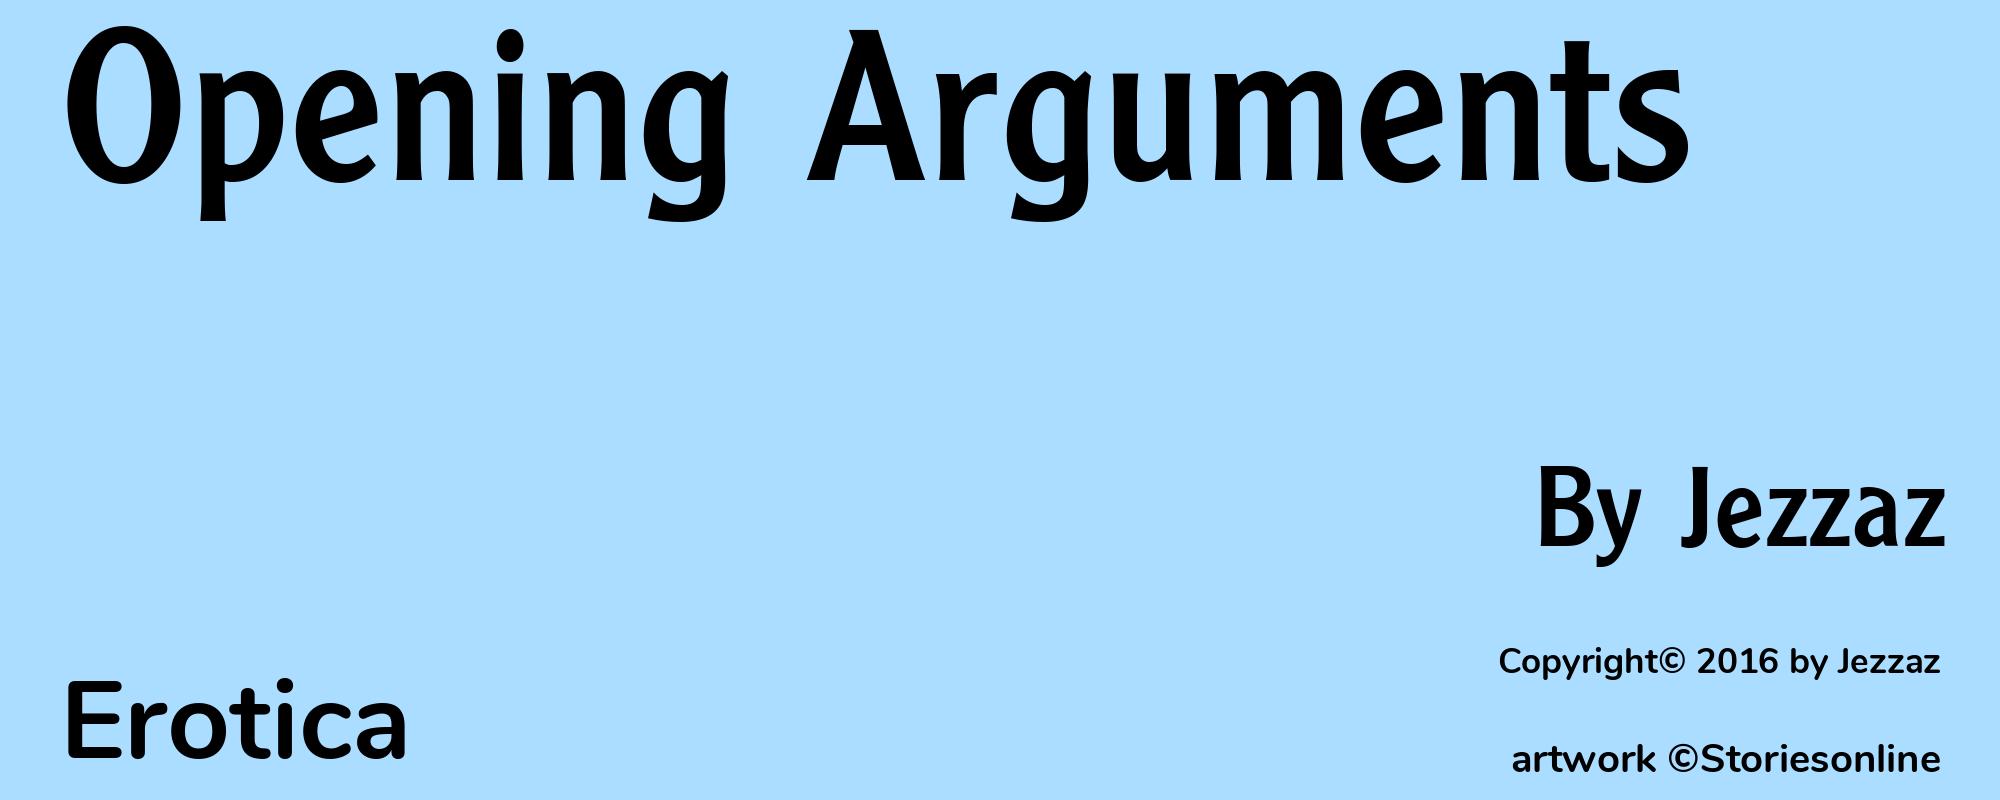 Opening Arguments - Cover